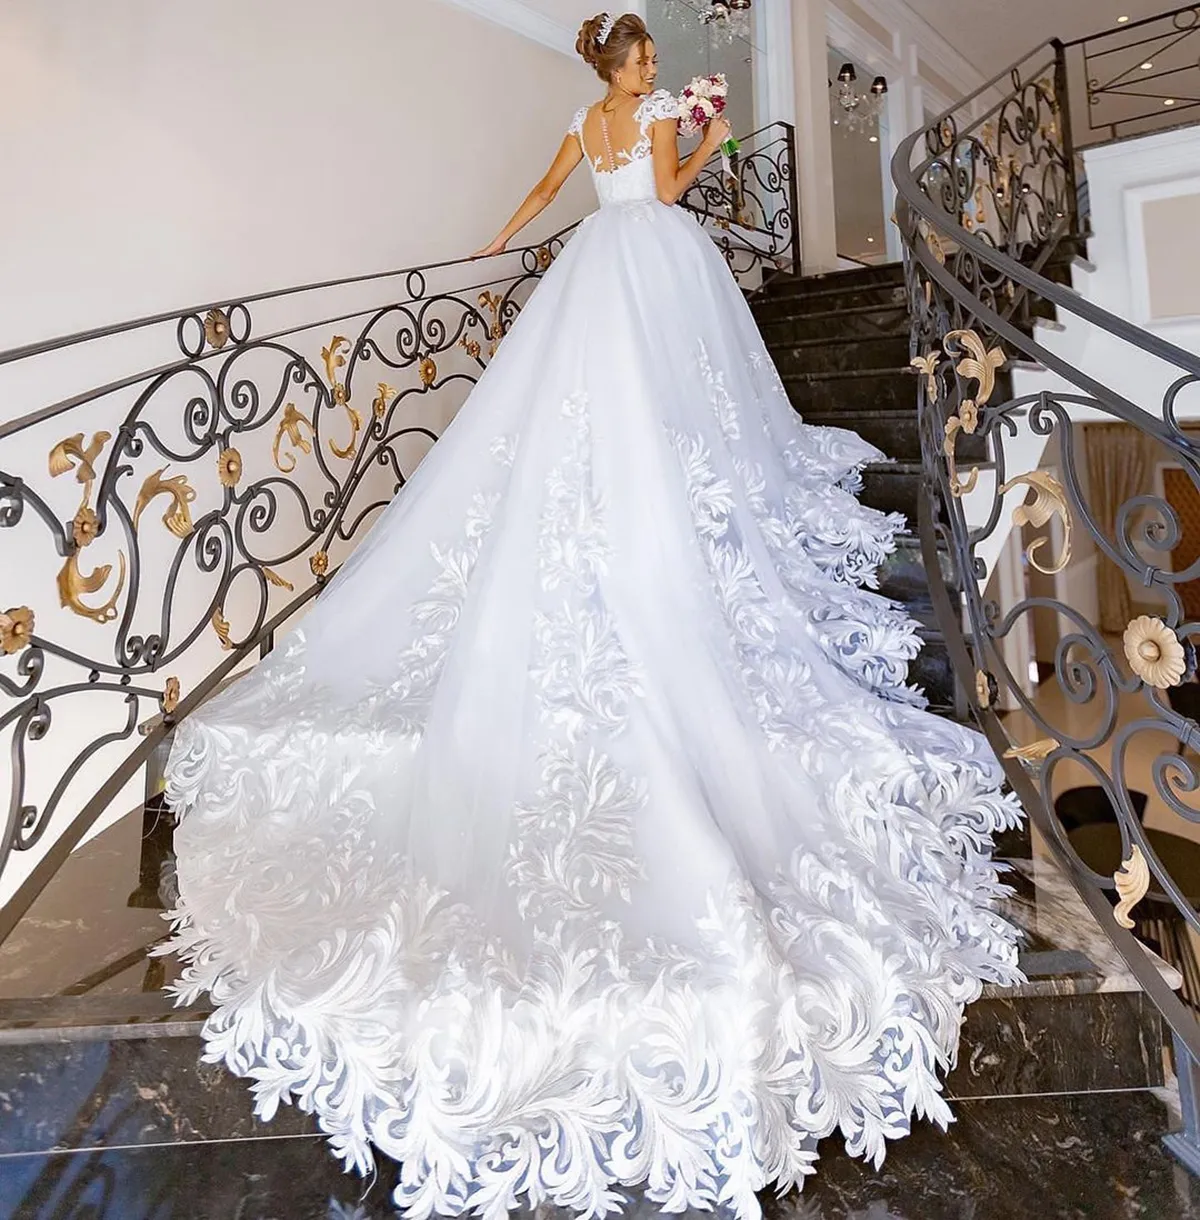 Elegant Ball Gown Wedding Dresses Sweetheart Short Sleeves Special Applicants Tulle Backless Chapel Gown Tulle Custom Made Bridal Gown Vestidos De Novia